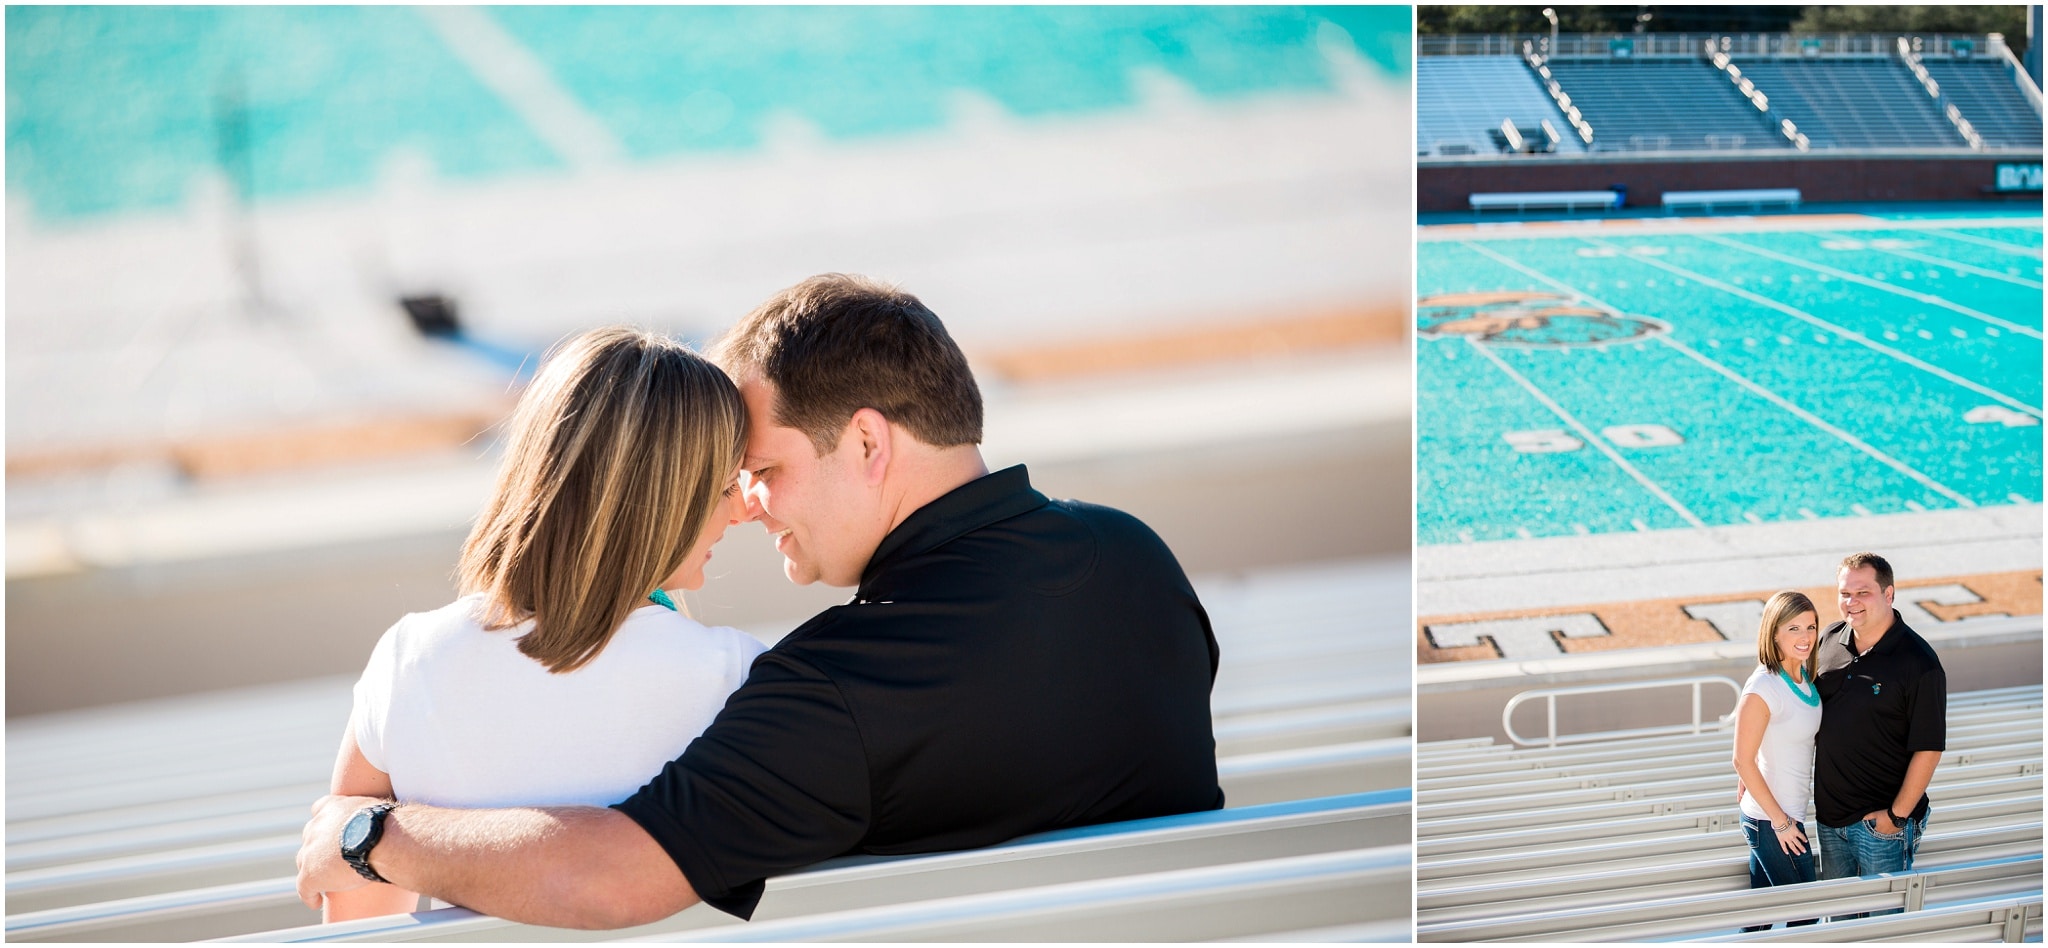 Photos on a football stadium stands, Save the Date Football, Dana and Bradley being close in the stands, Myrtle Beach Engagement Photography Session 1, Coastal Carolina University, www.onelifephoto.net